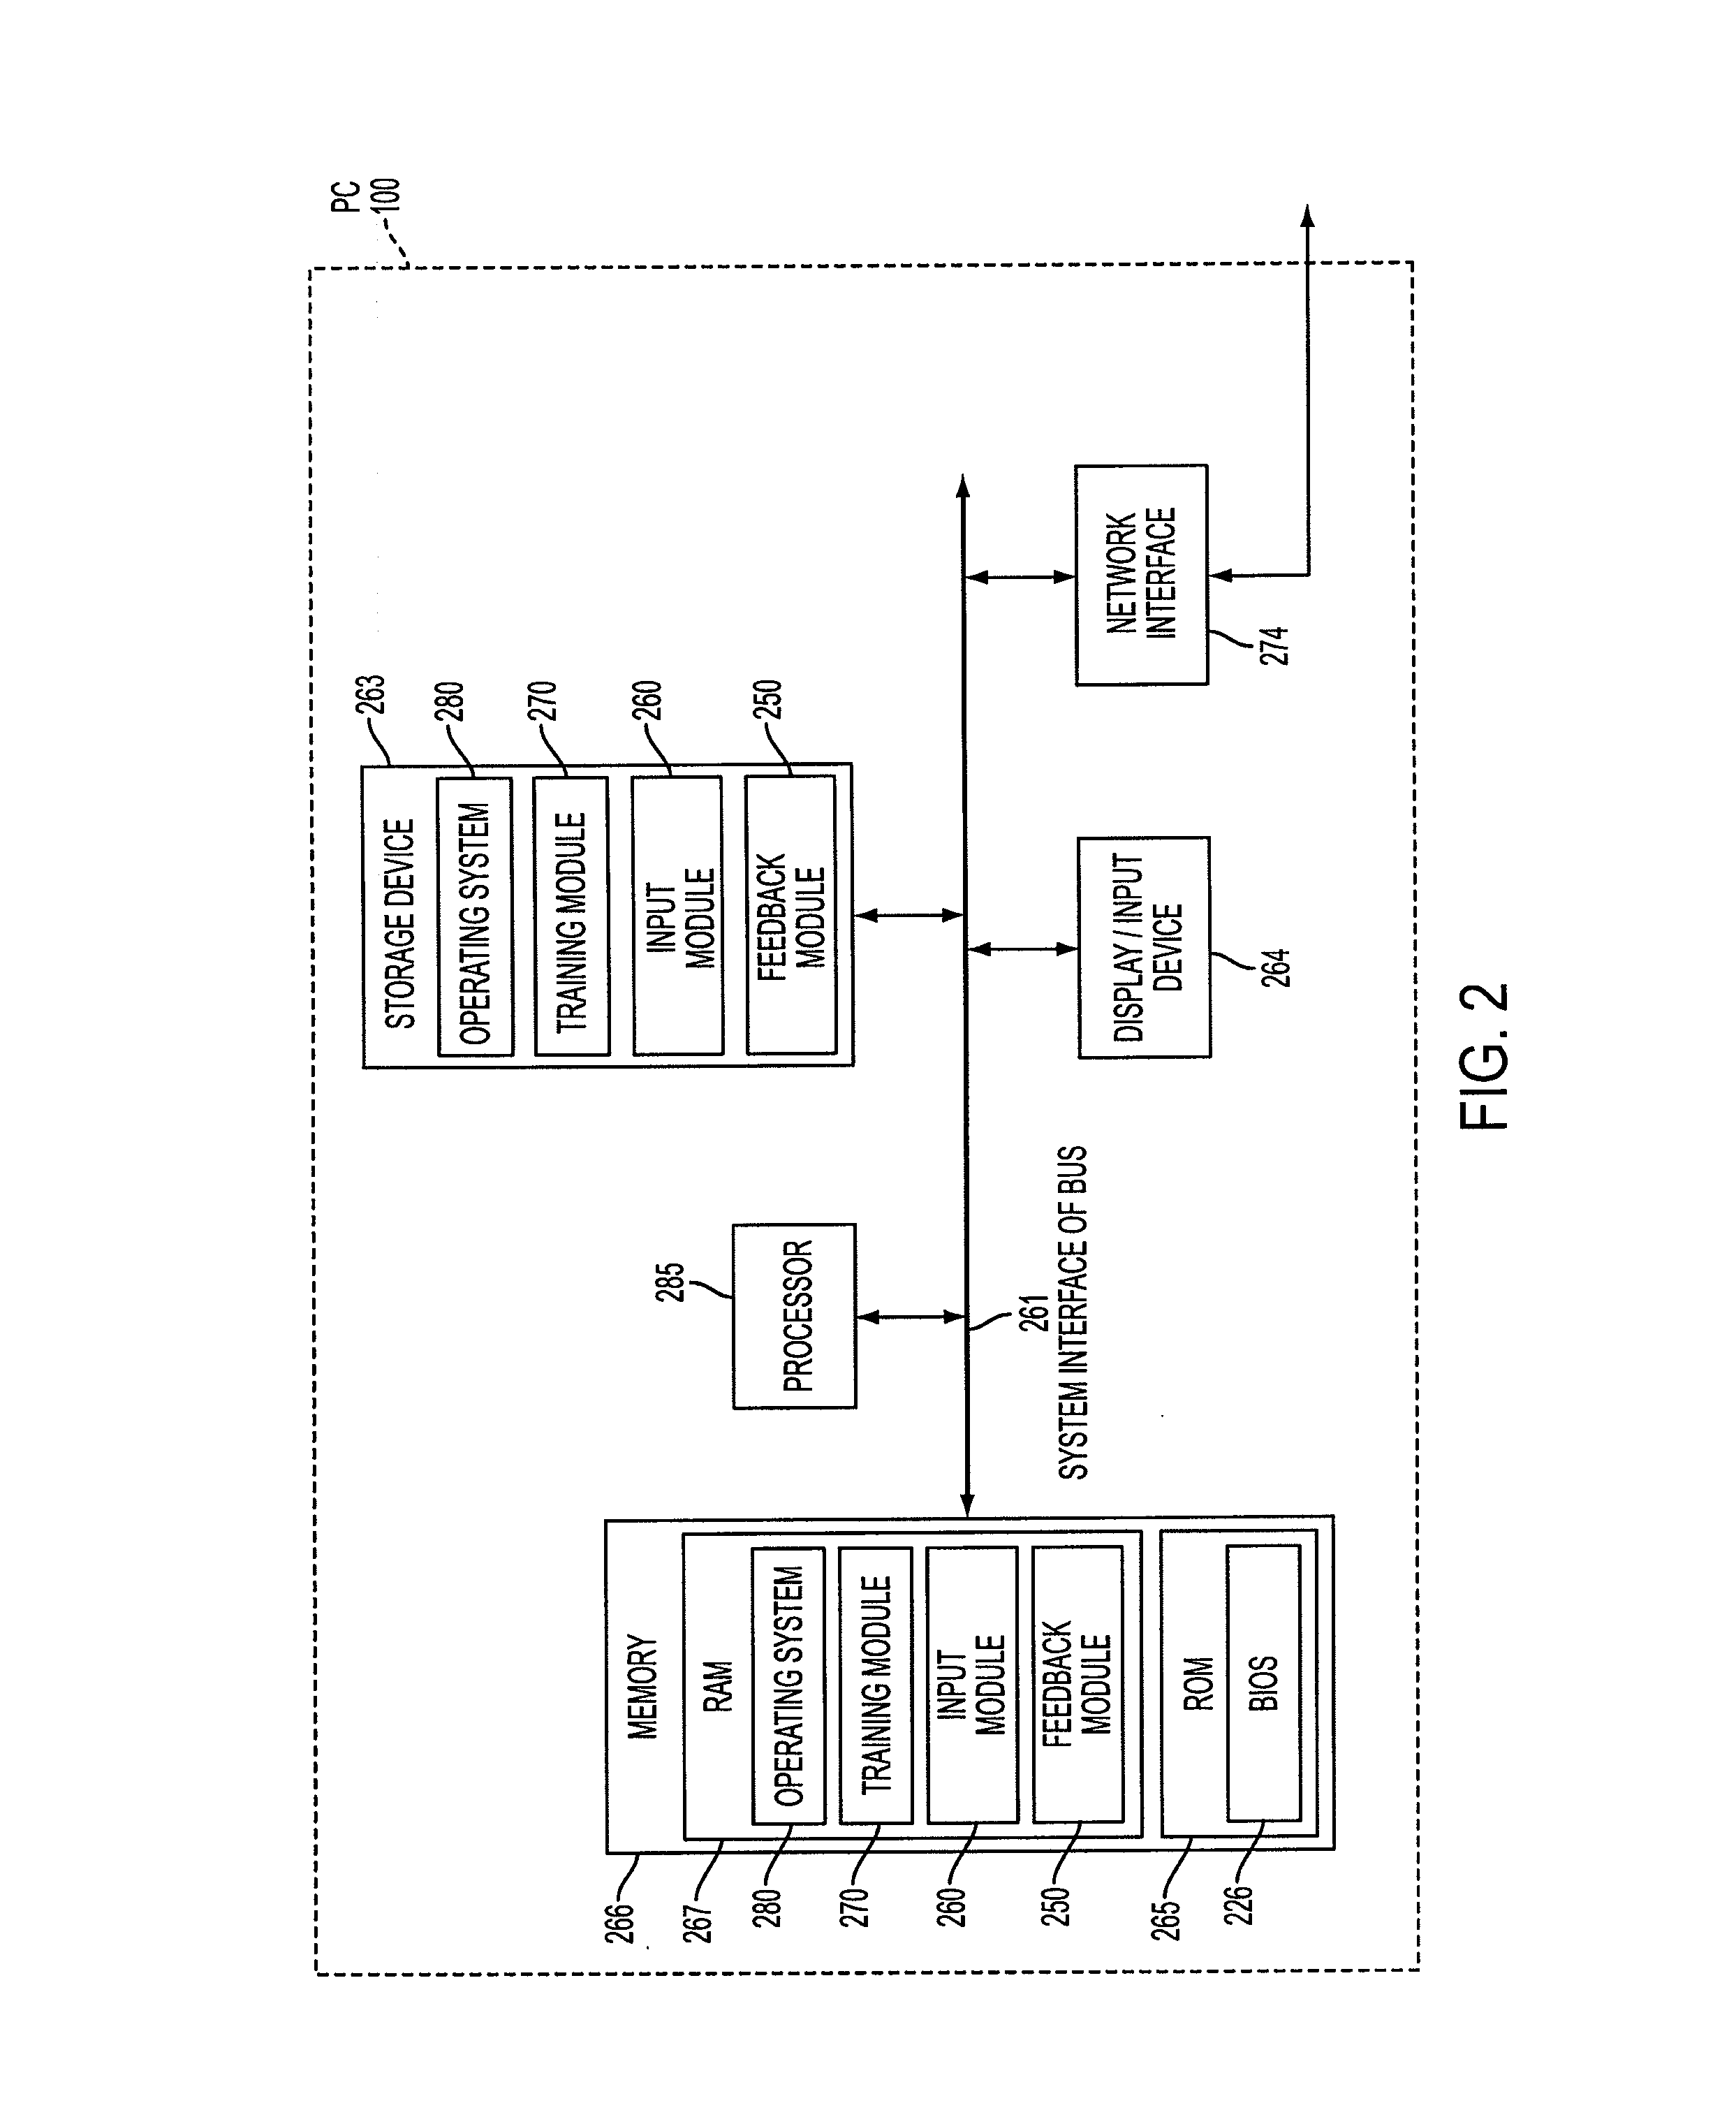 Systems and methods for improving user efficiency with handheld devices